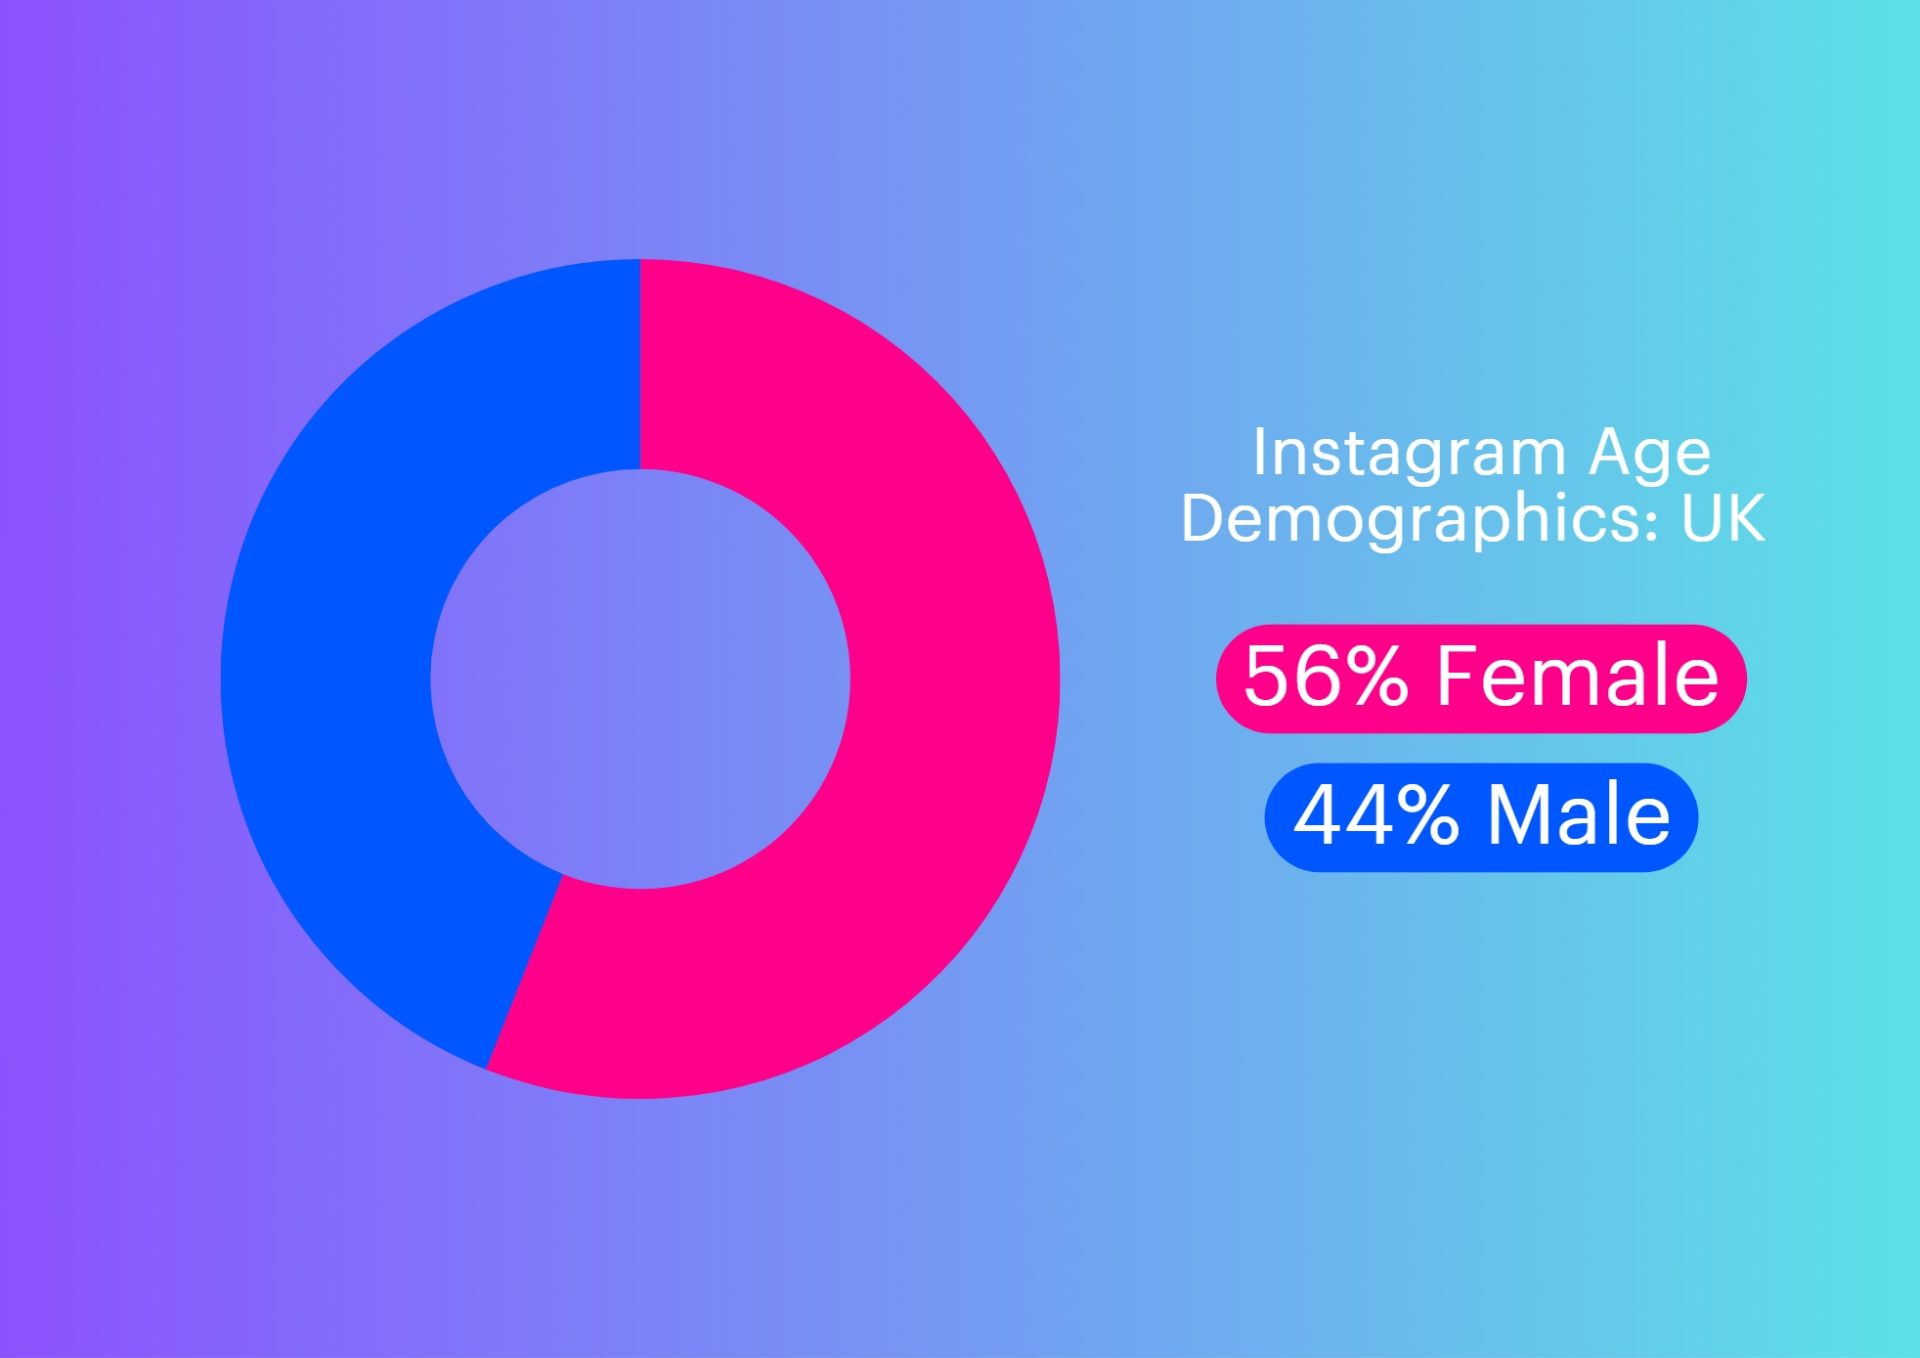 A pie chart depicting the gender demographics on Instagram in the UK, with 56% women, and 44% male. 